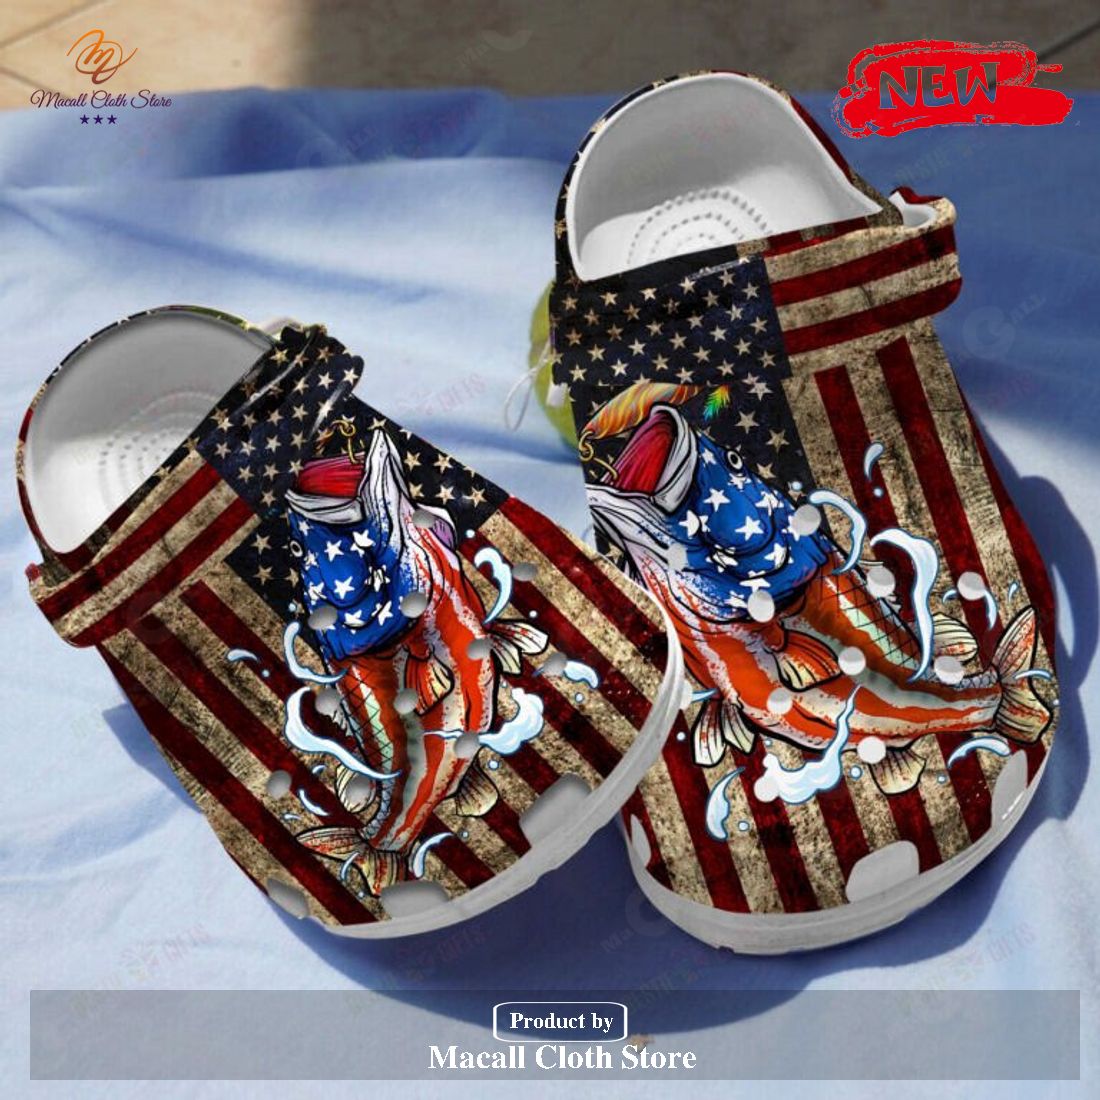 NEW] Bass Fish Of American Classic 4TH Of July Gifts For Men Women Crocs  Clogs Shoes - Macall Cloth Store - Destination for fashionistas